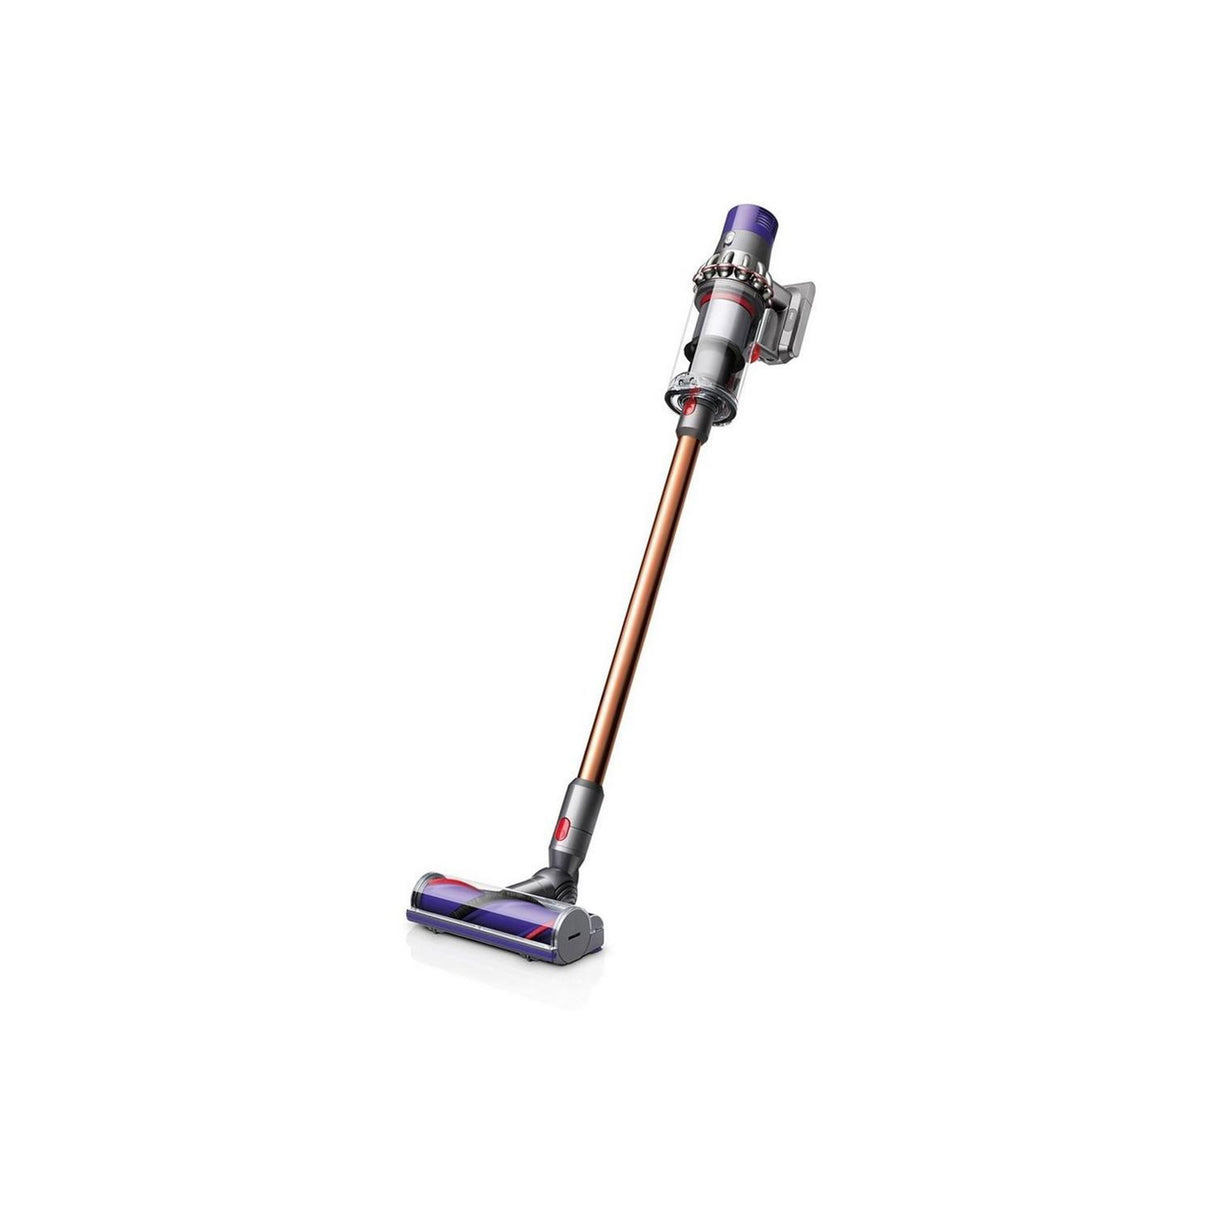 Dyson Cyclone V10 Absolute Pro Cordless Vacuum Cleaner